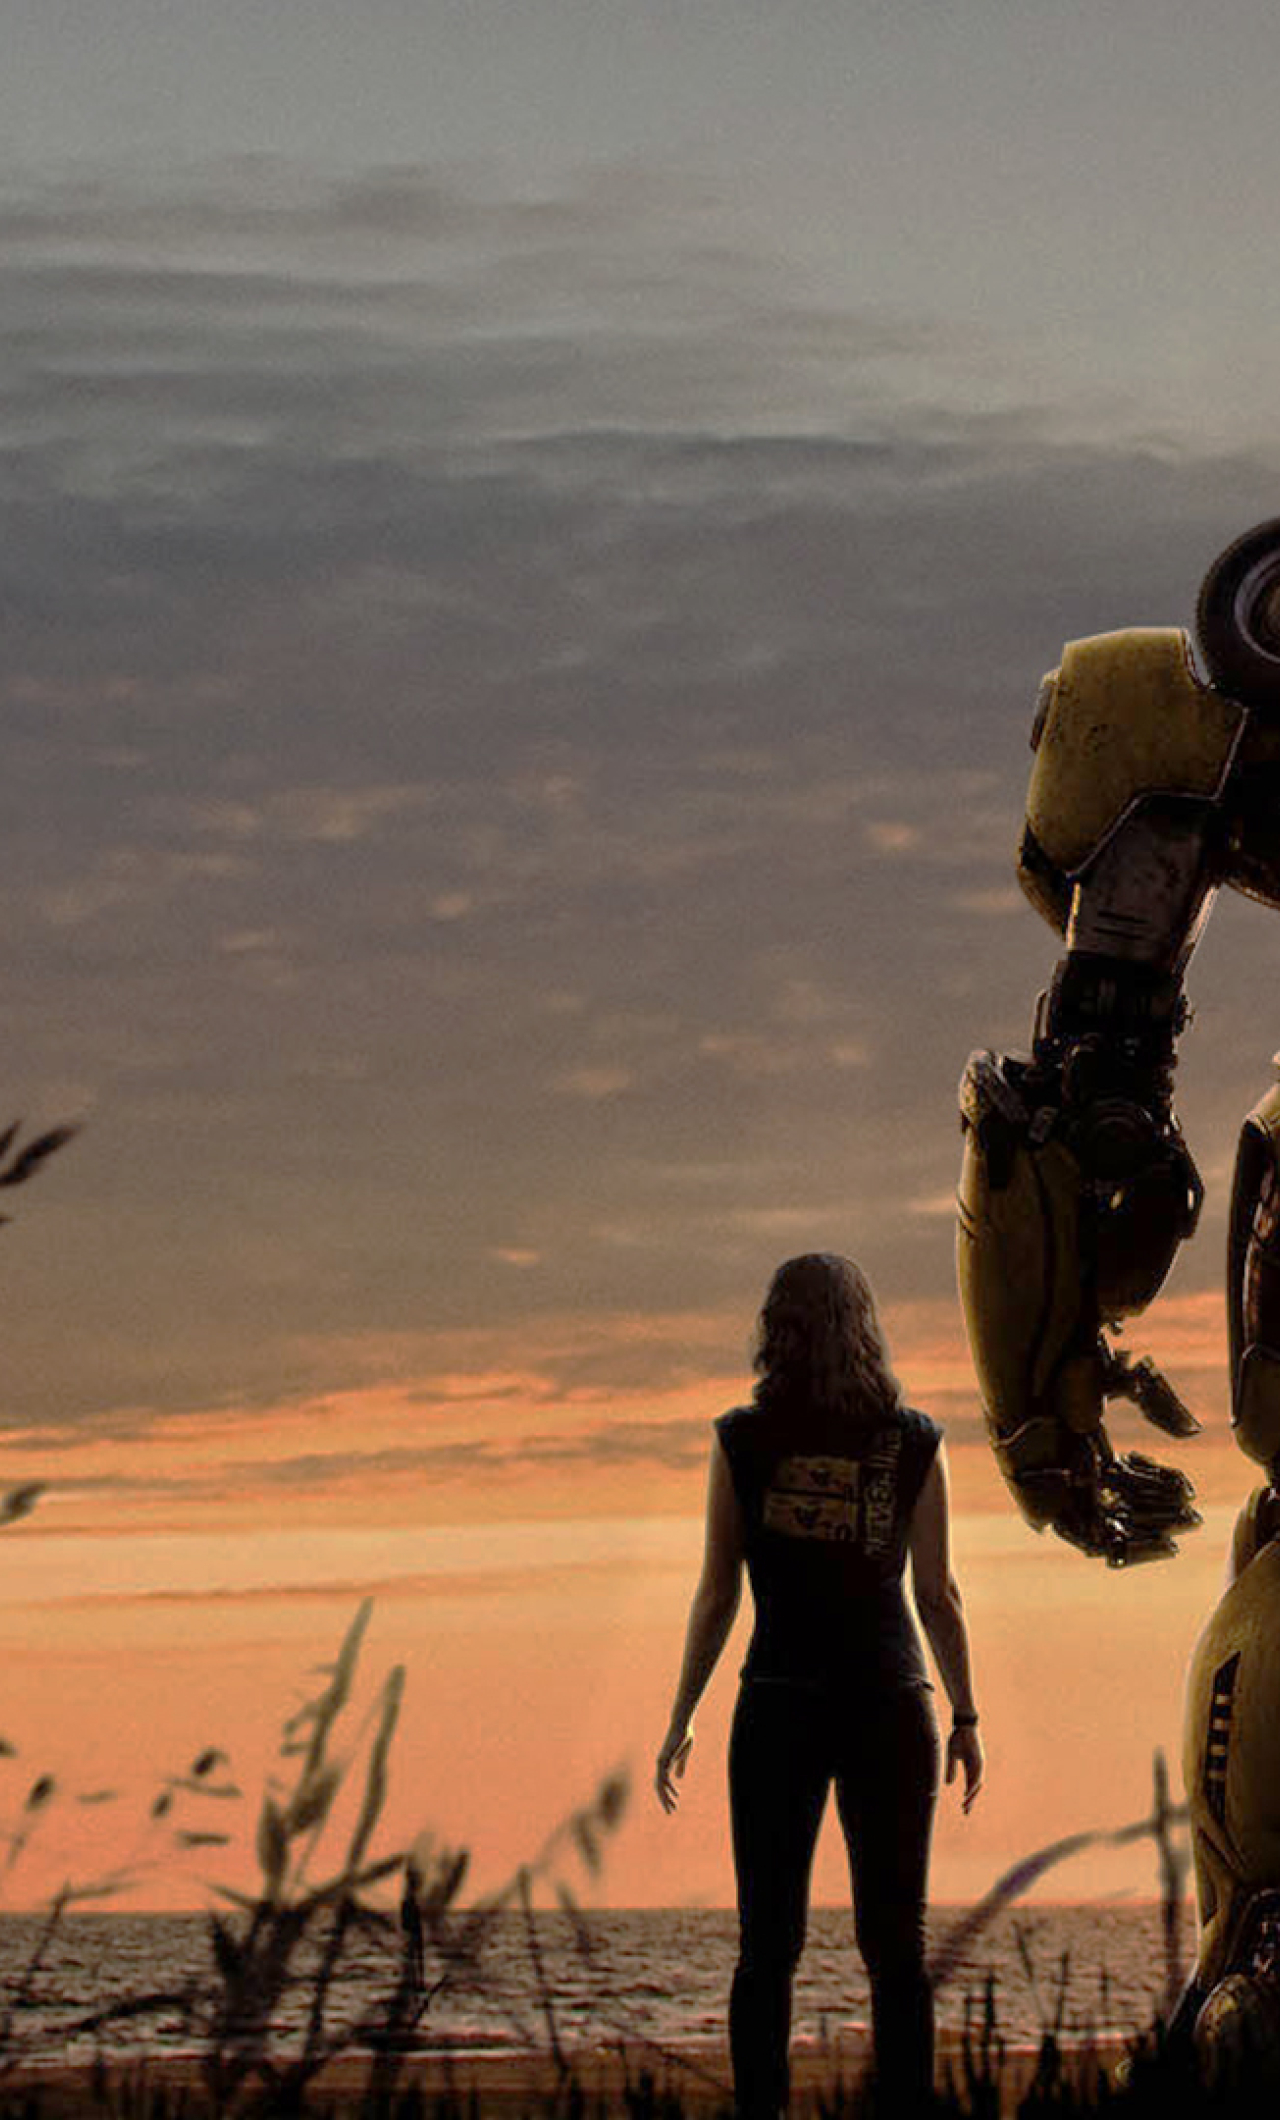 Download Bumblebee 2018 Movie Poster 2160x3840 Resolution, Full HD Wallpaper